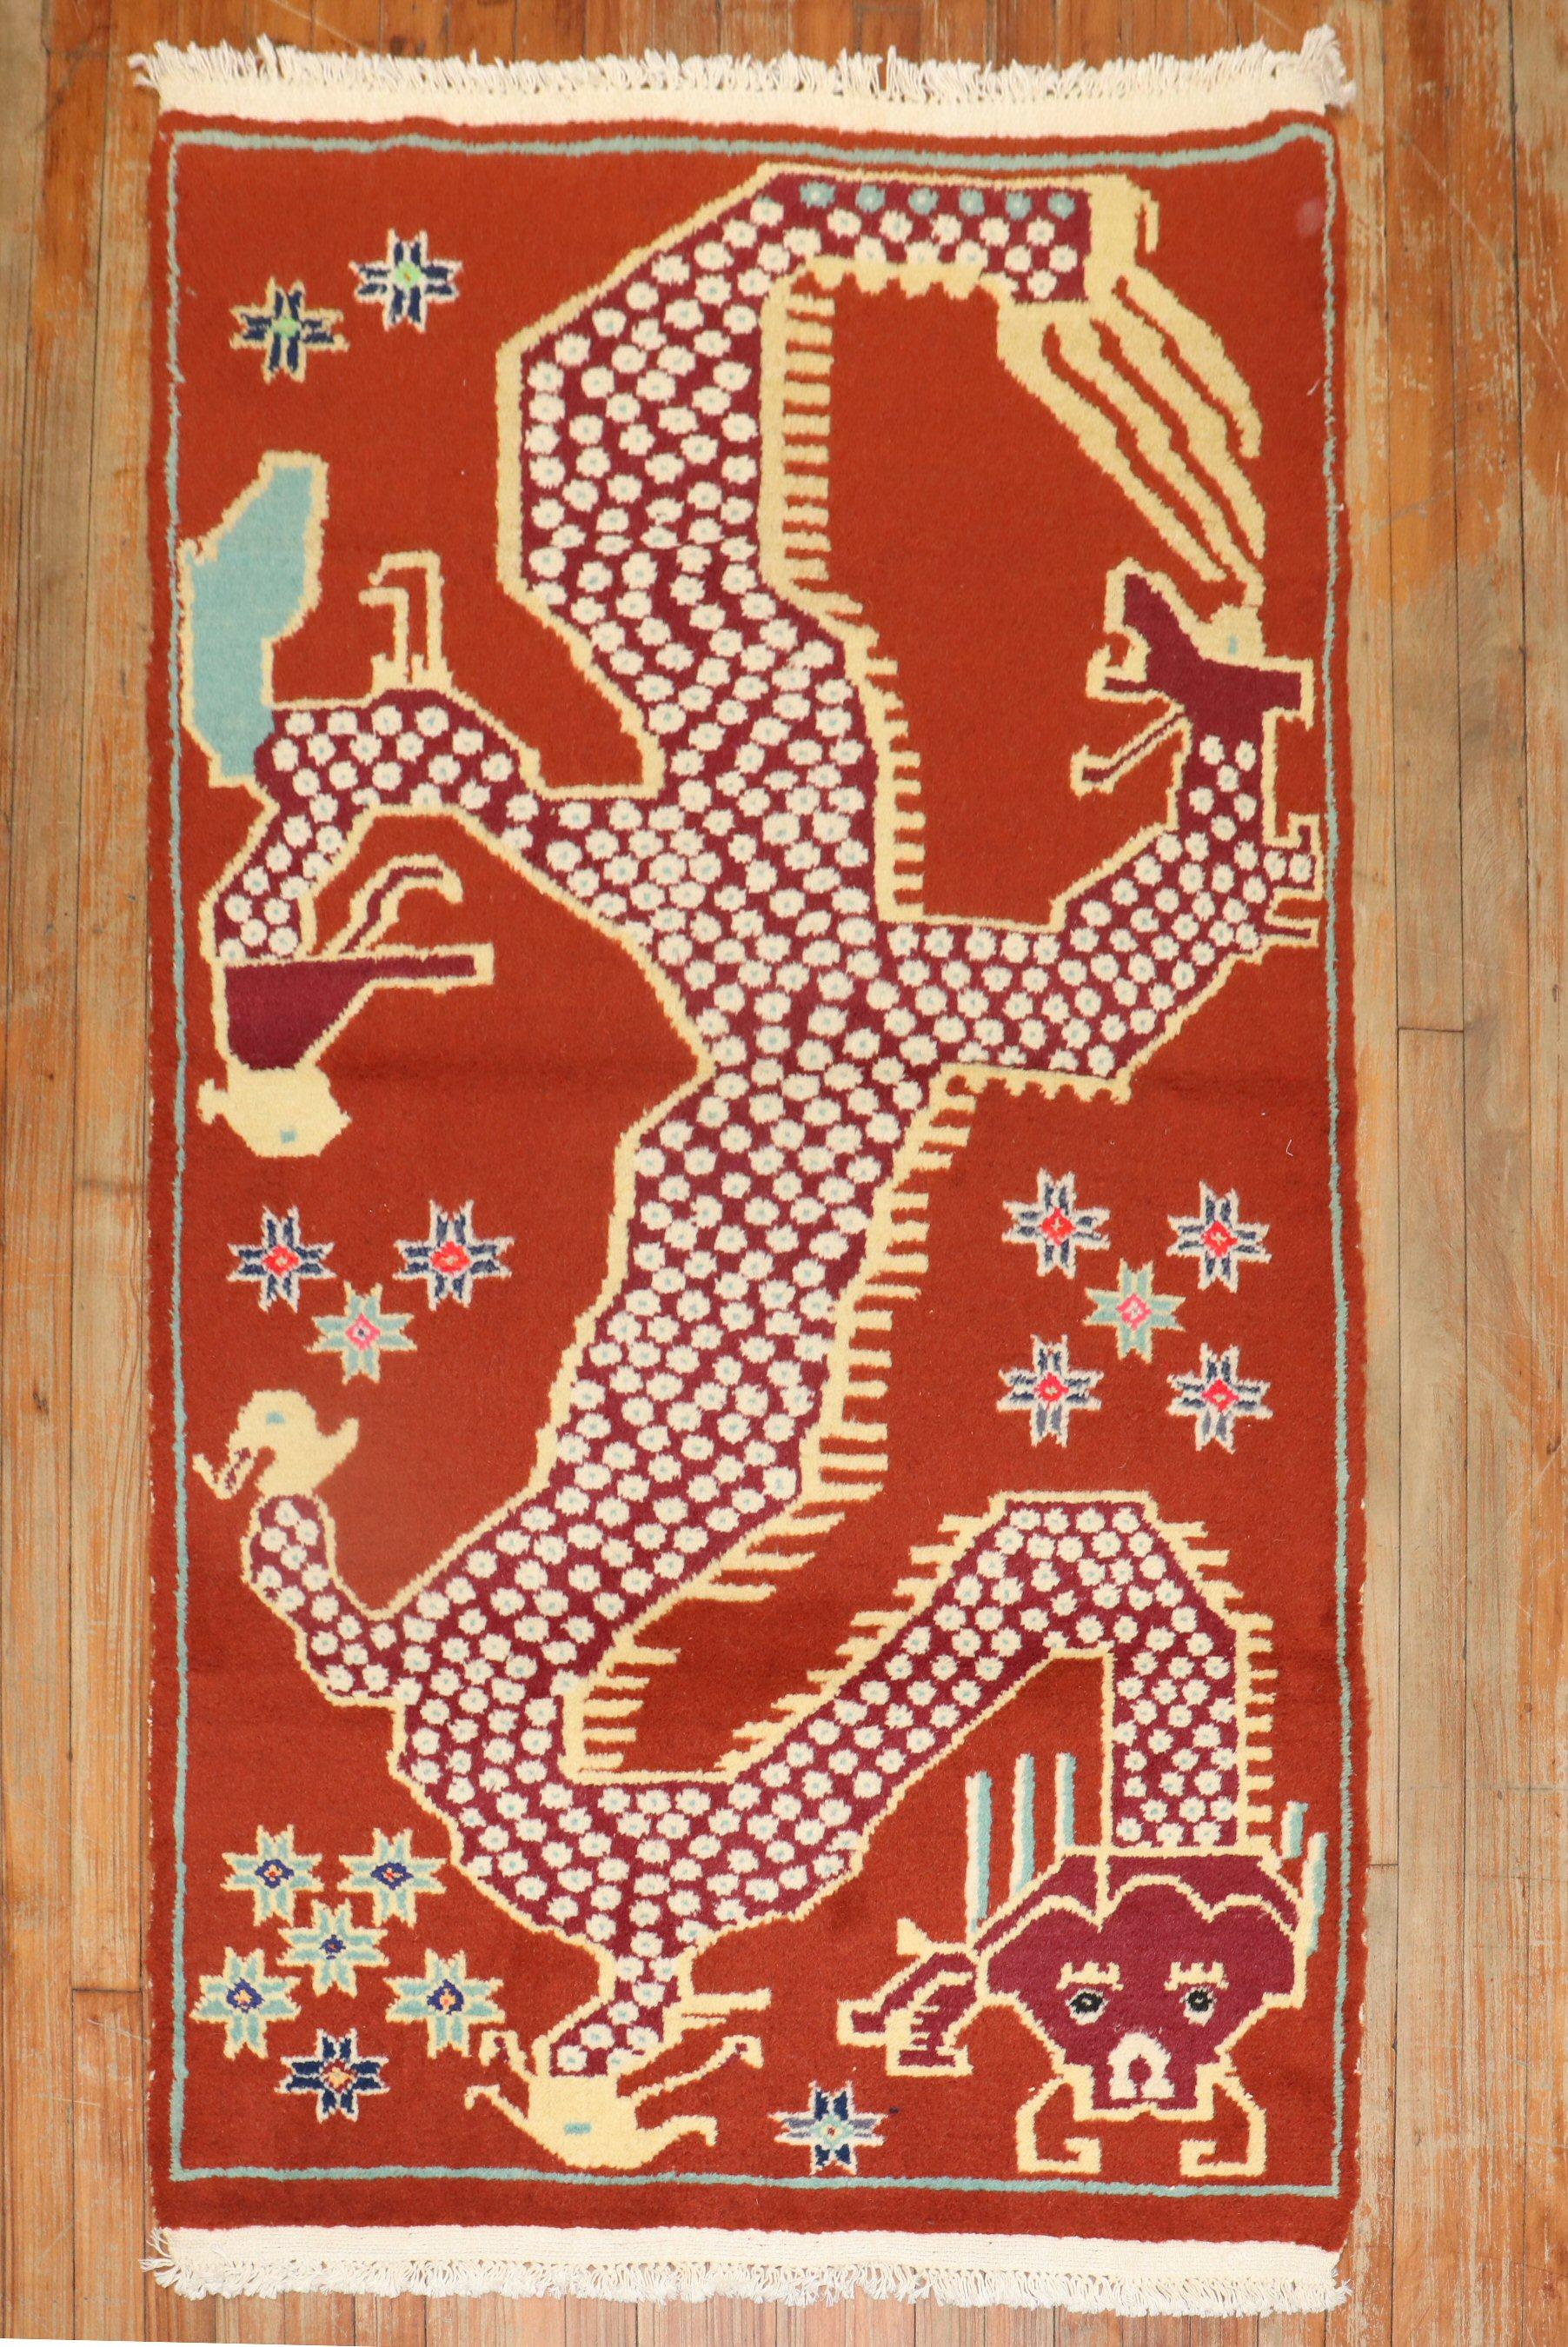 Colorful one-of-a-kind Tibetan rug from the 3rd quarter of the 20th century with a dragon motif

Measures: 3'4'' x 5'7''.